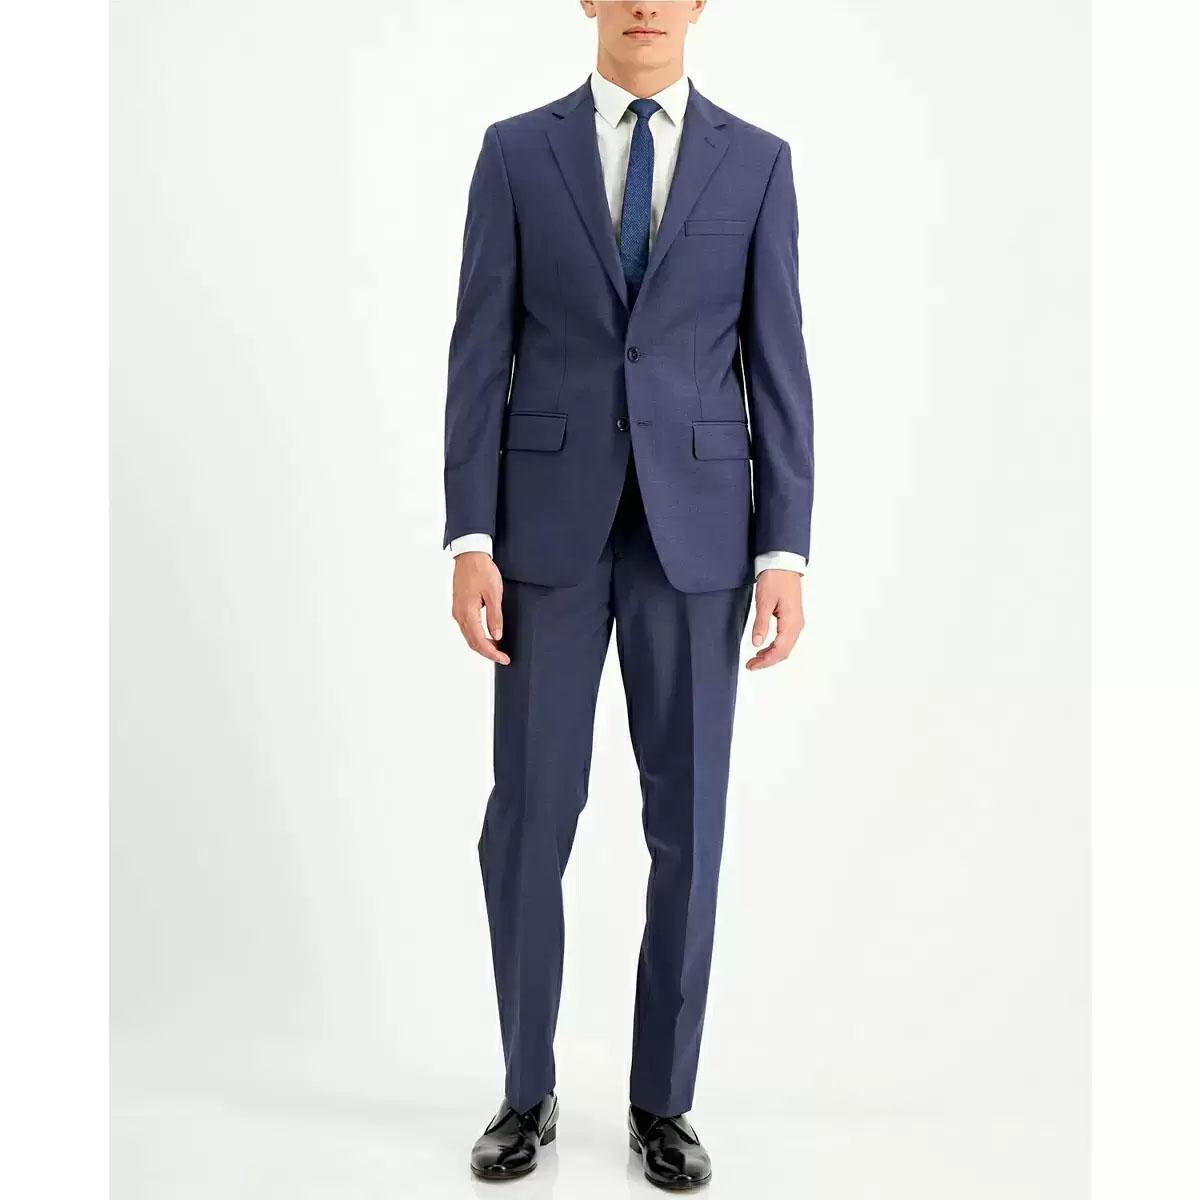 2-Piece Calvin Klein Mens Slim Fit Woot Suit for $83.99 Shipped